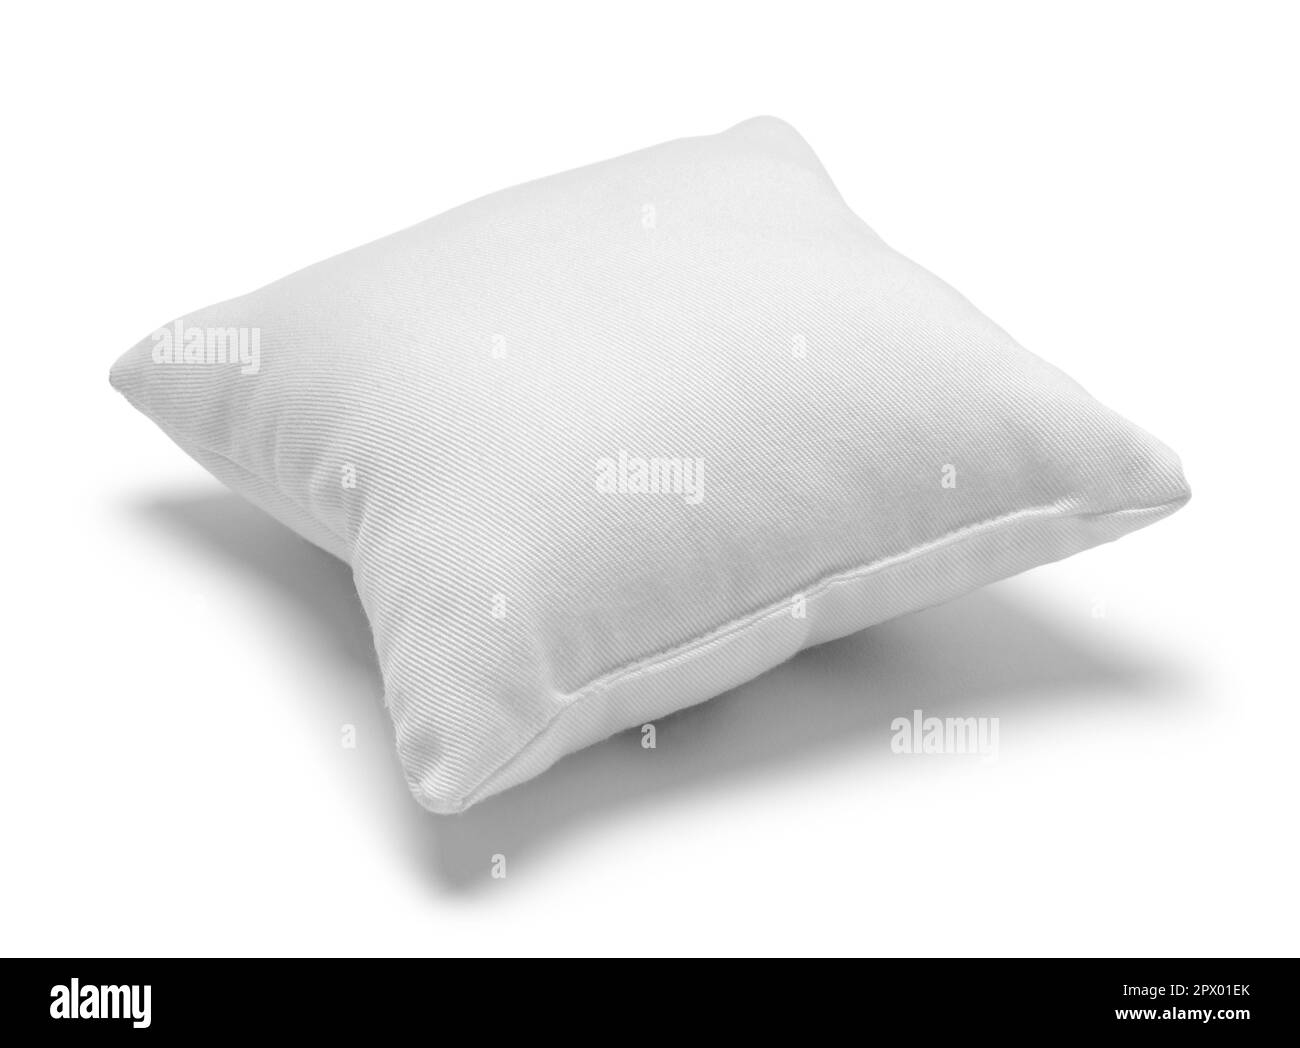 Small Square Pillow Cut Out on White. Stock Photo